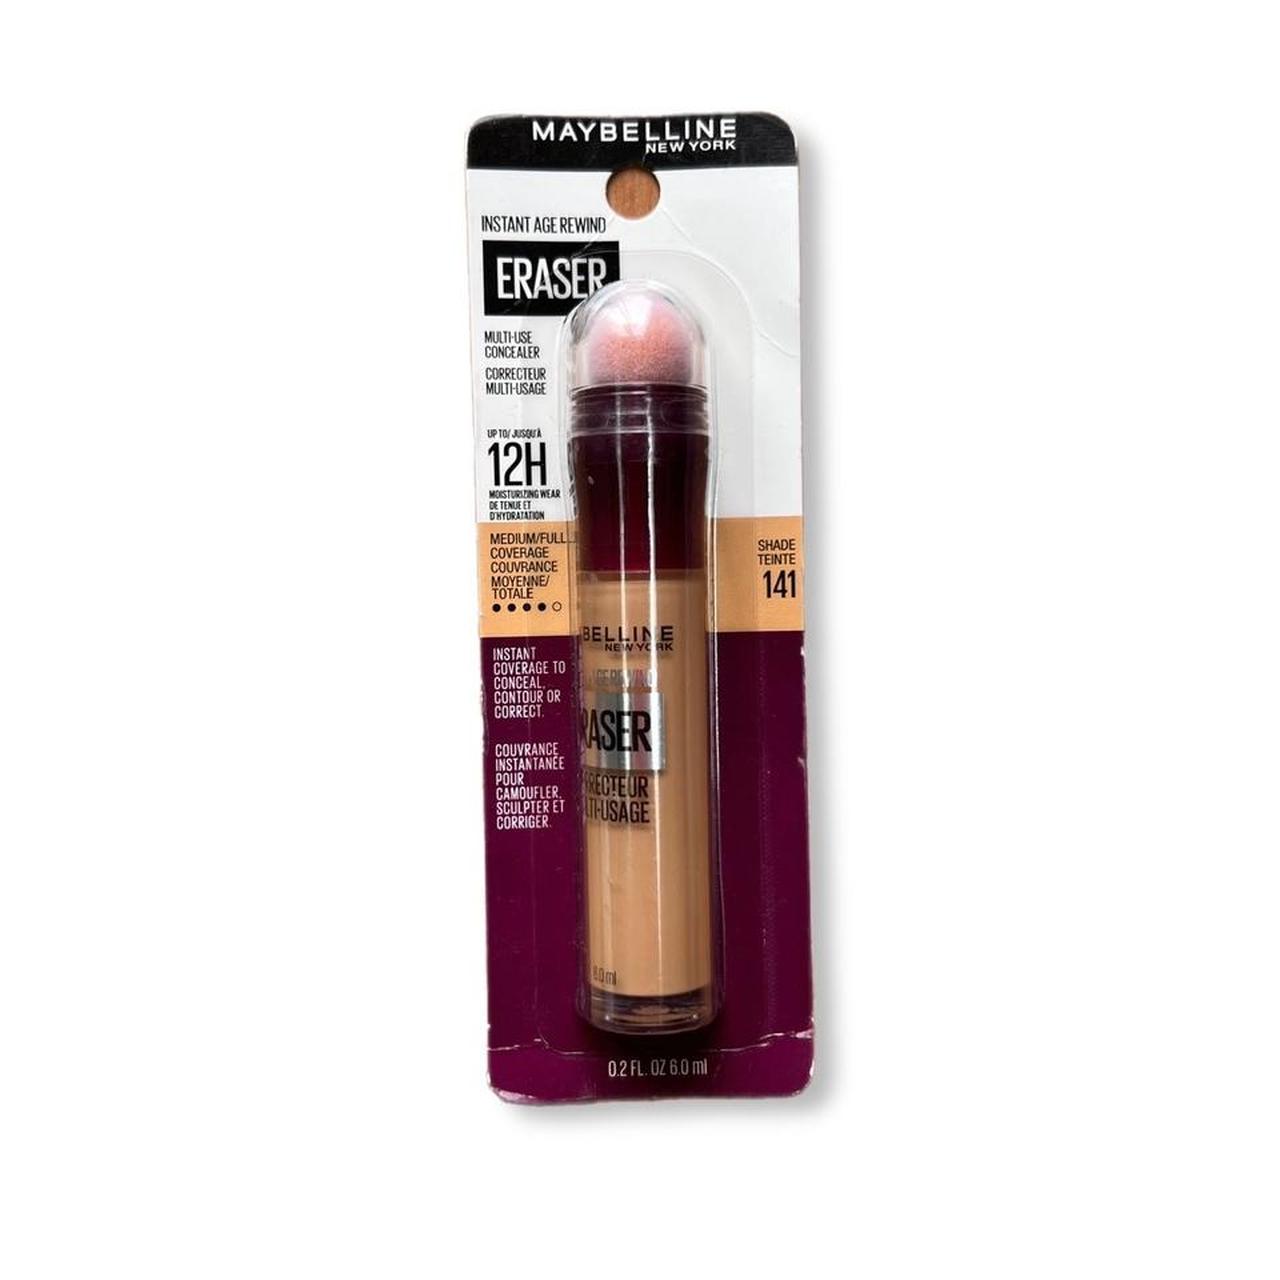 Maybelline Tan and Brown Makeup (3)